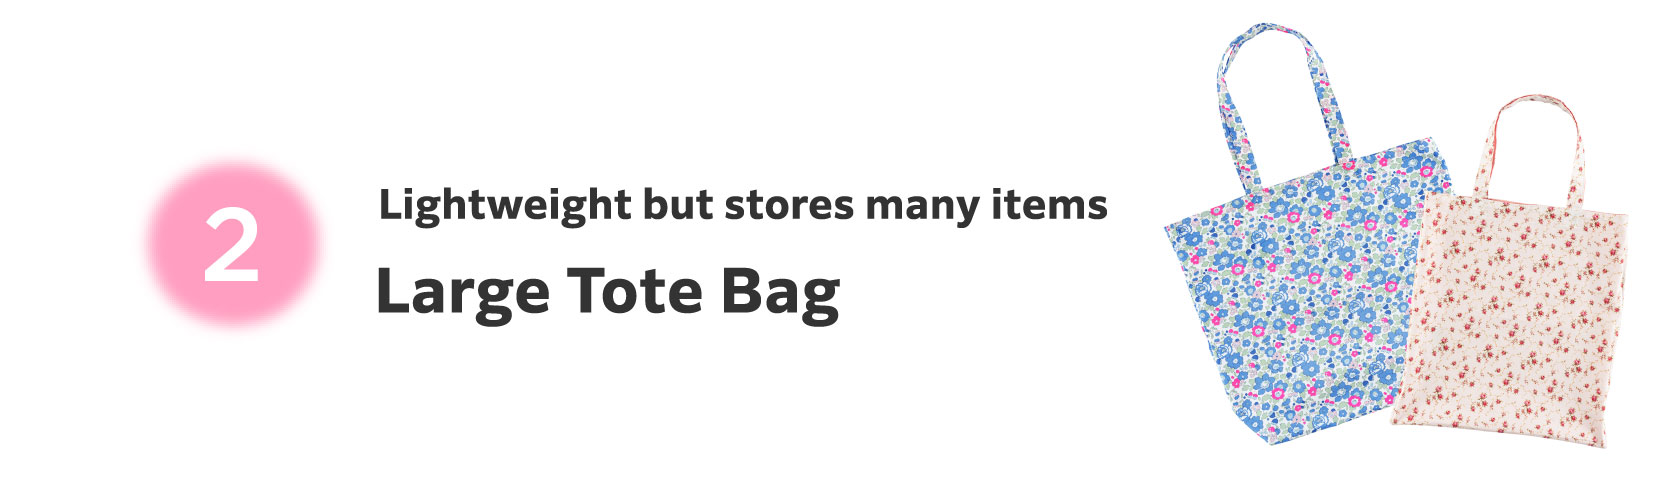 2　Lightweight but stores many items Large Tote Bag